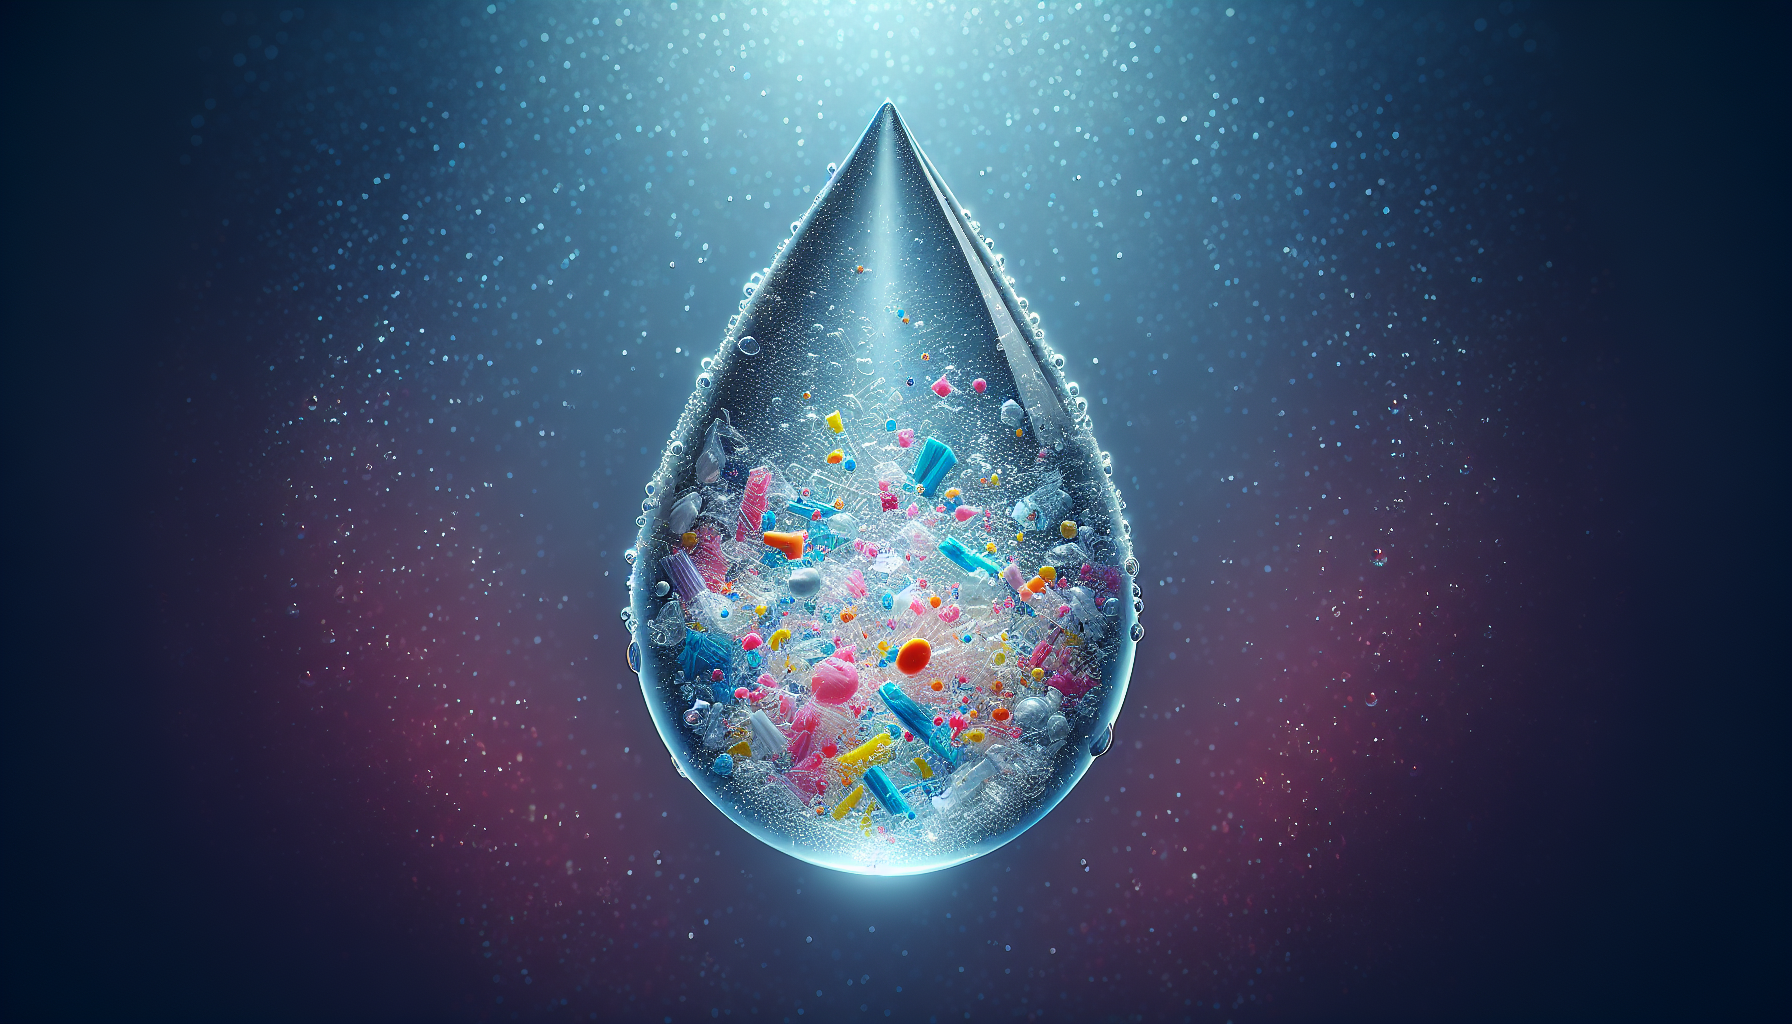 What Treatment Methods Are Effective For Well Water With High Levels Of Microplastics?